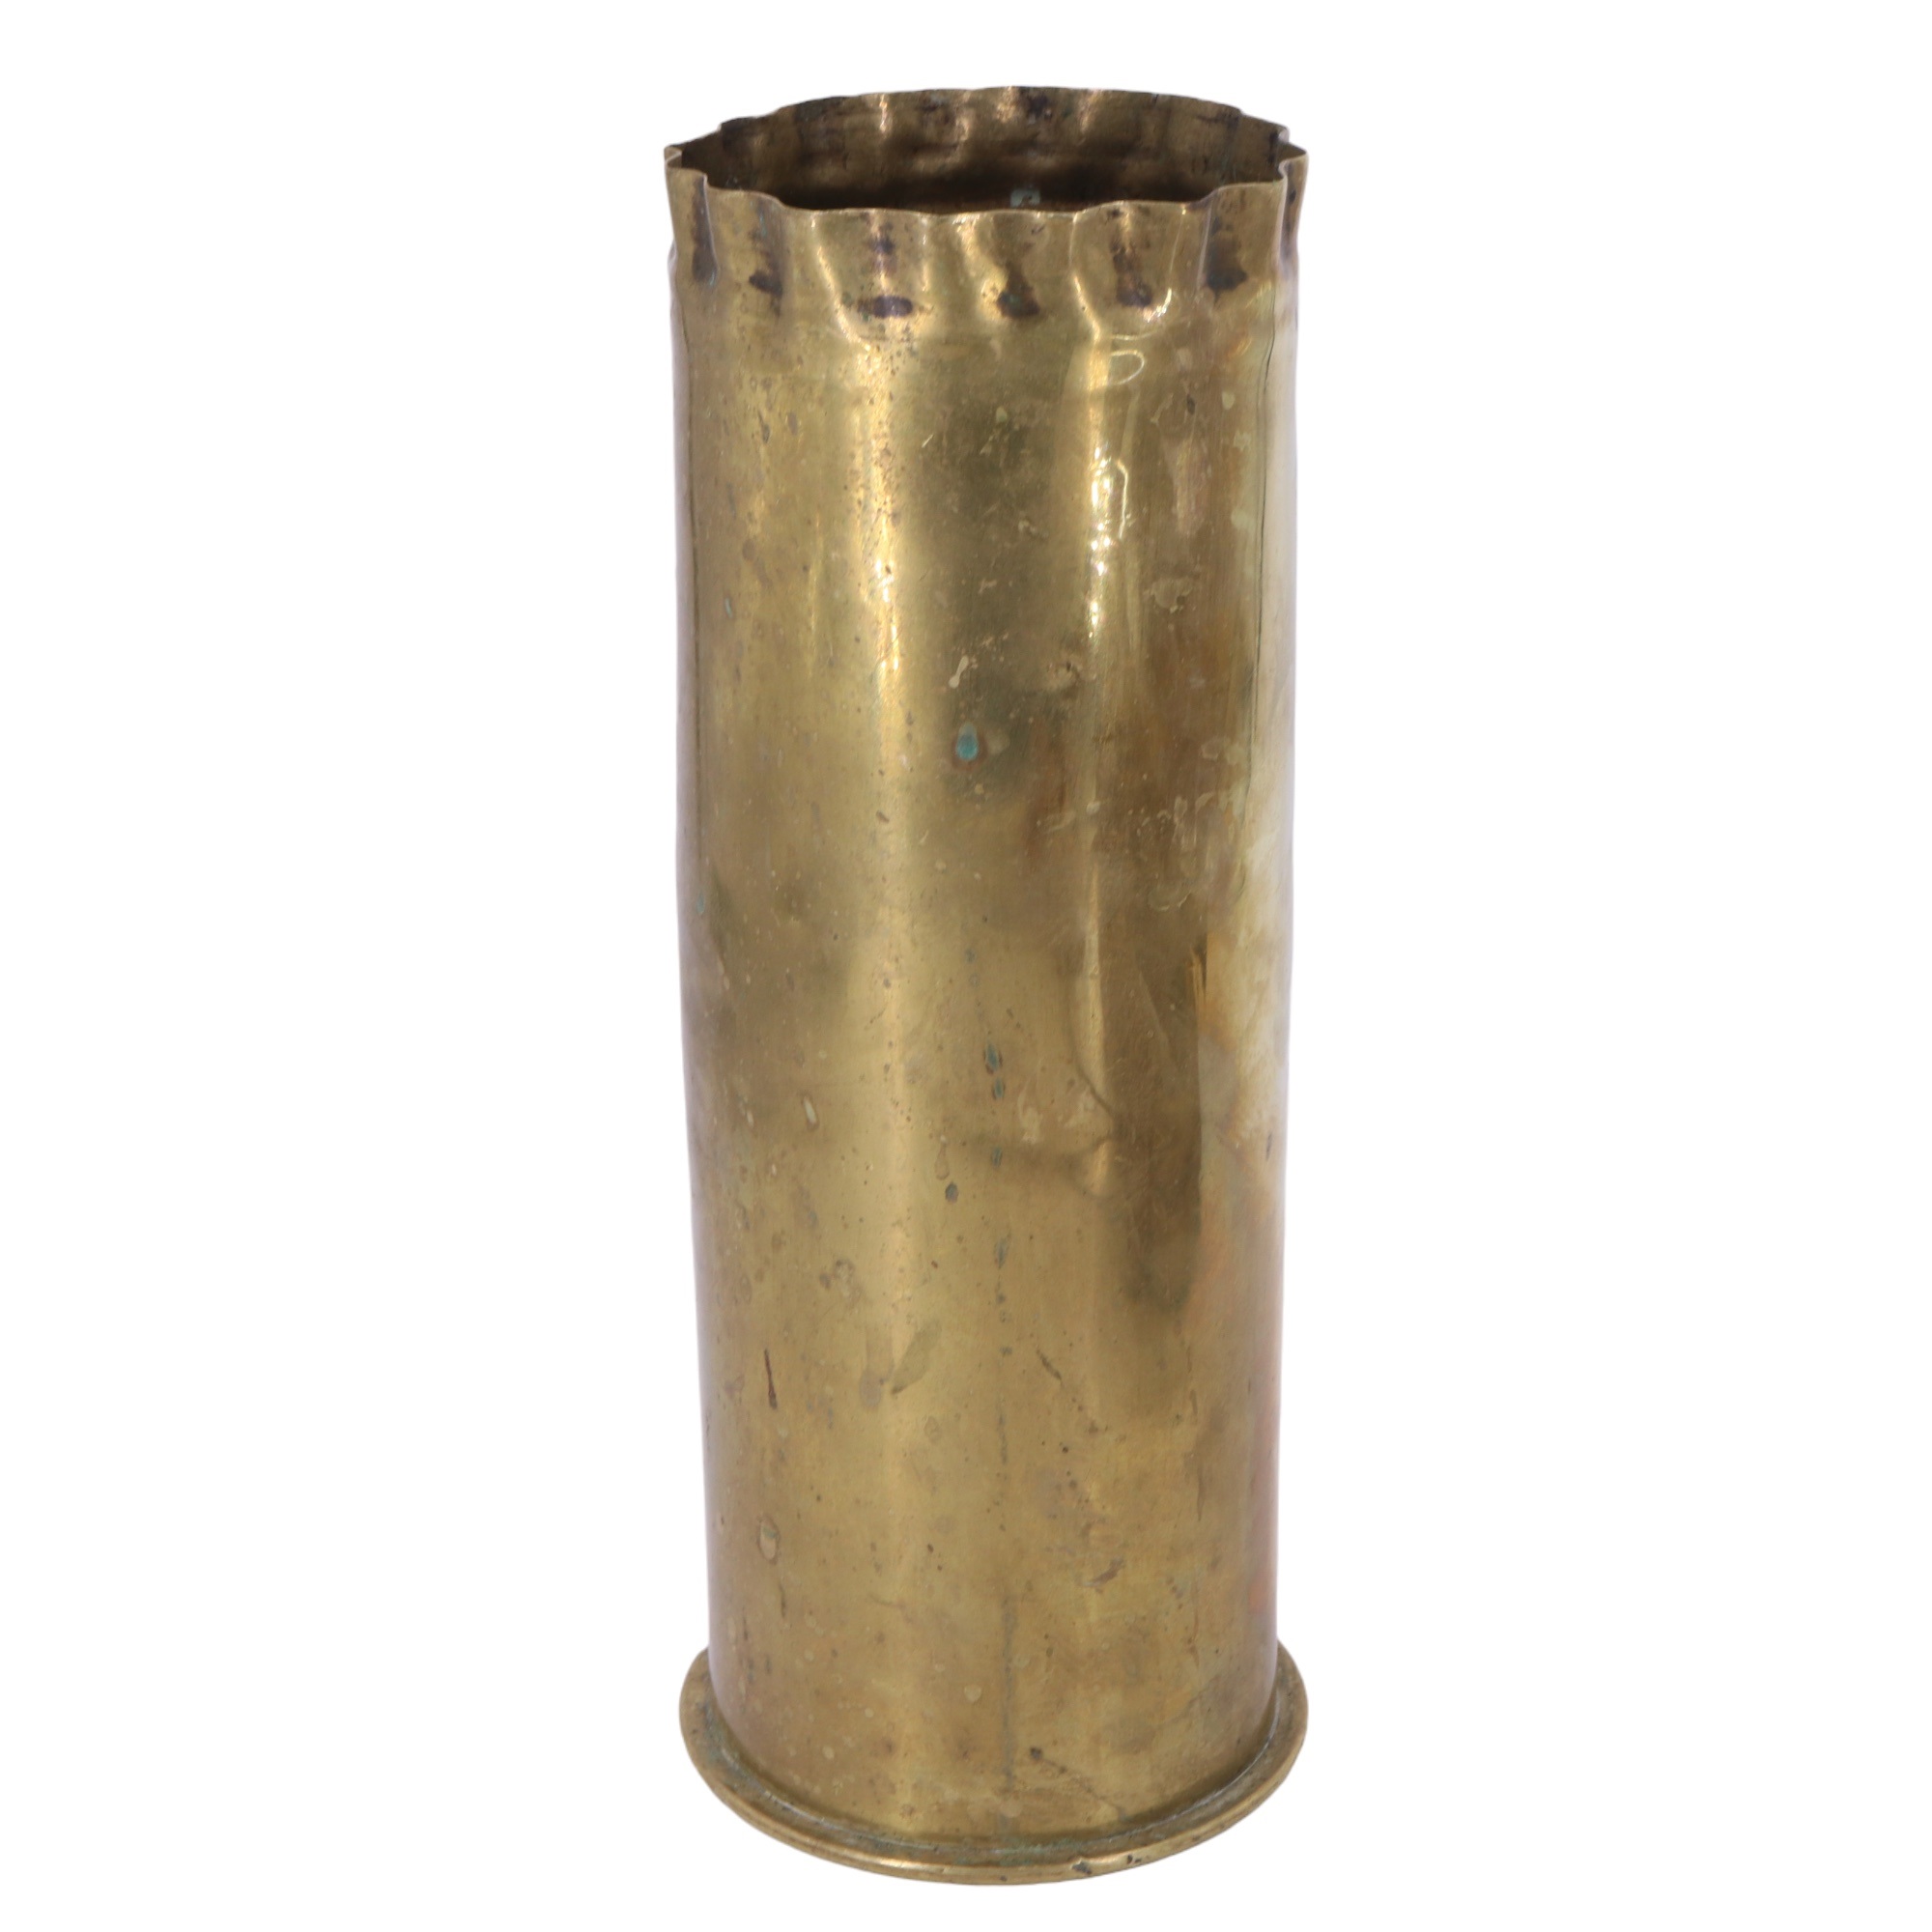 A Great War trench art vase, being a 1915 dated Imperial German artillery shell case chased and - Image 3 of 5